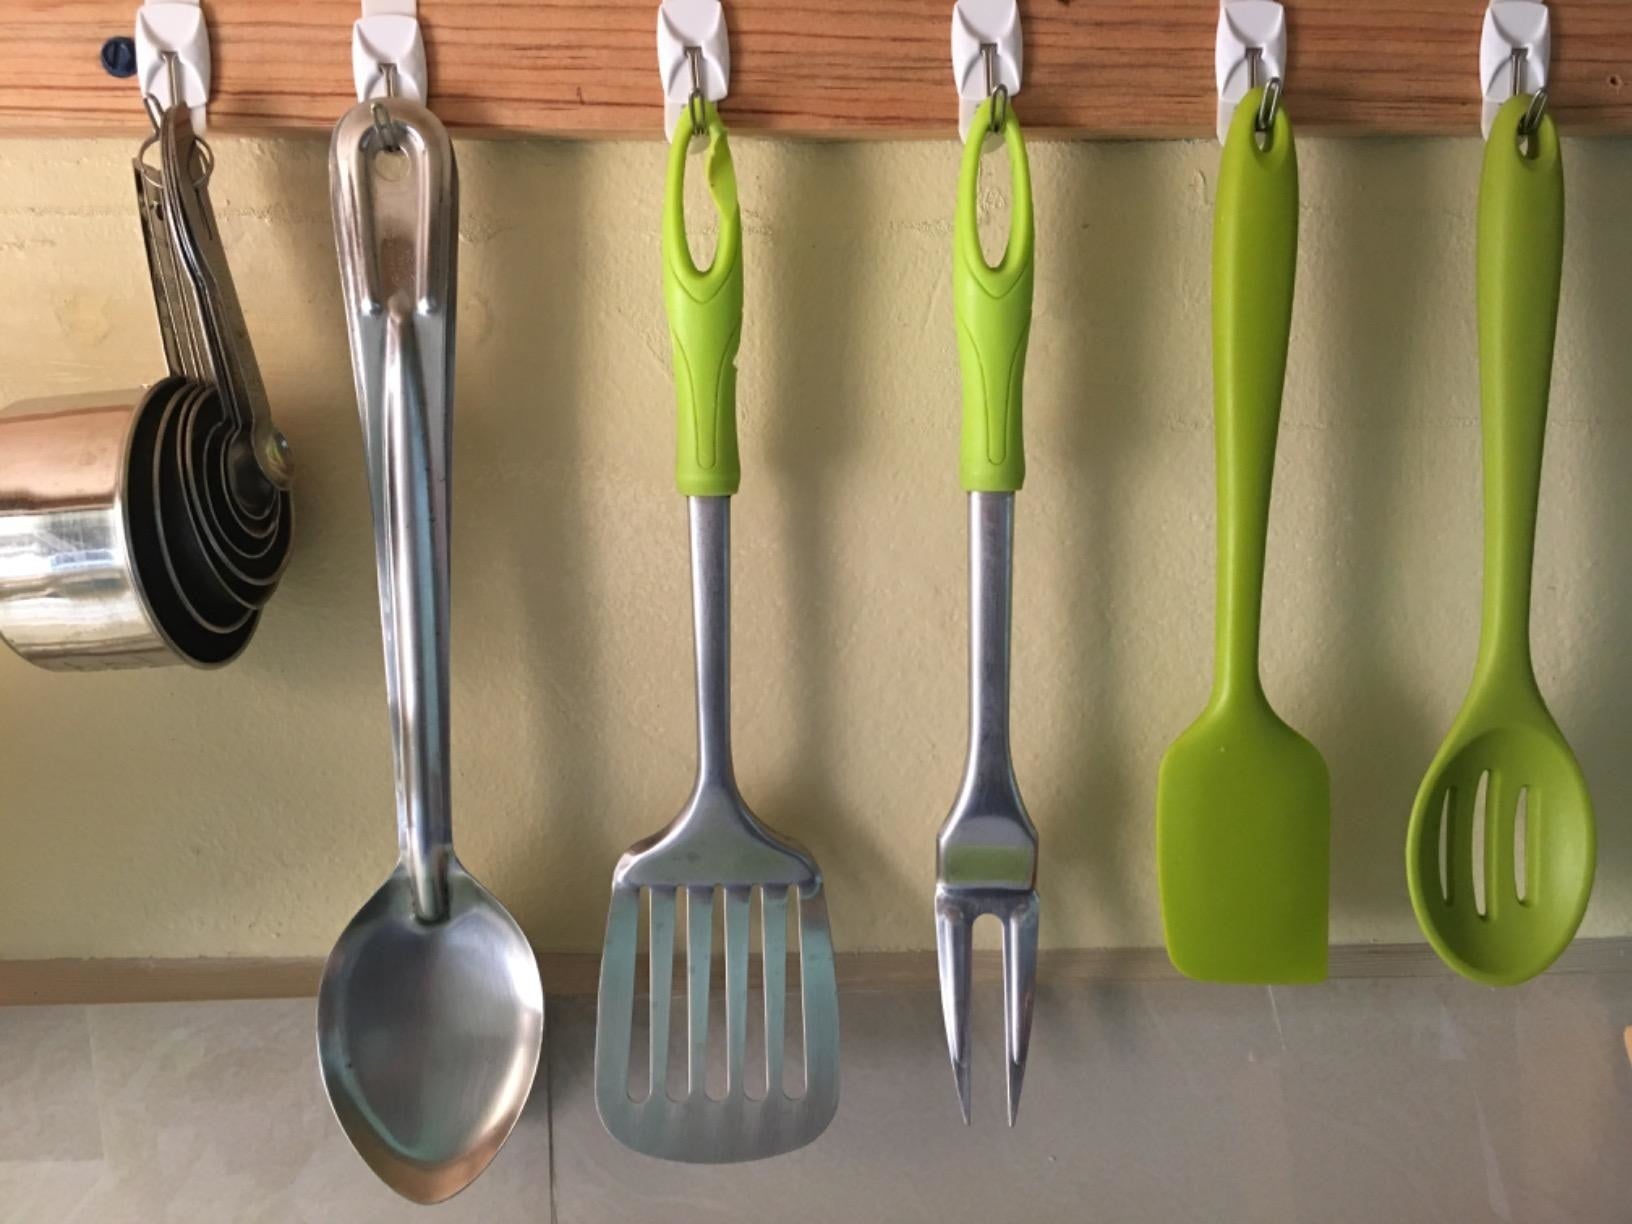 Kitchen tools hanging from Command hooks